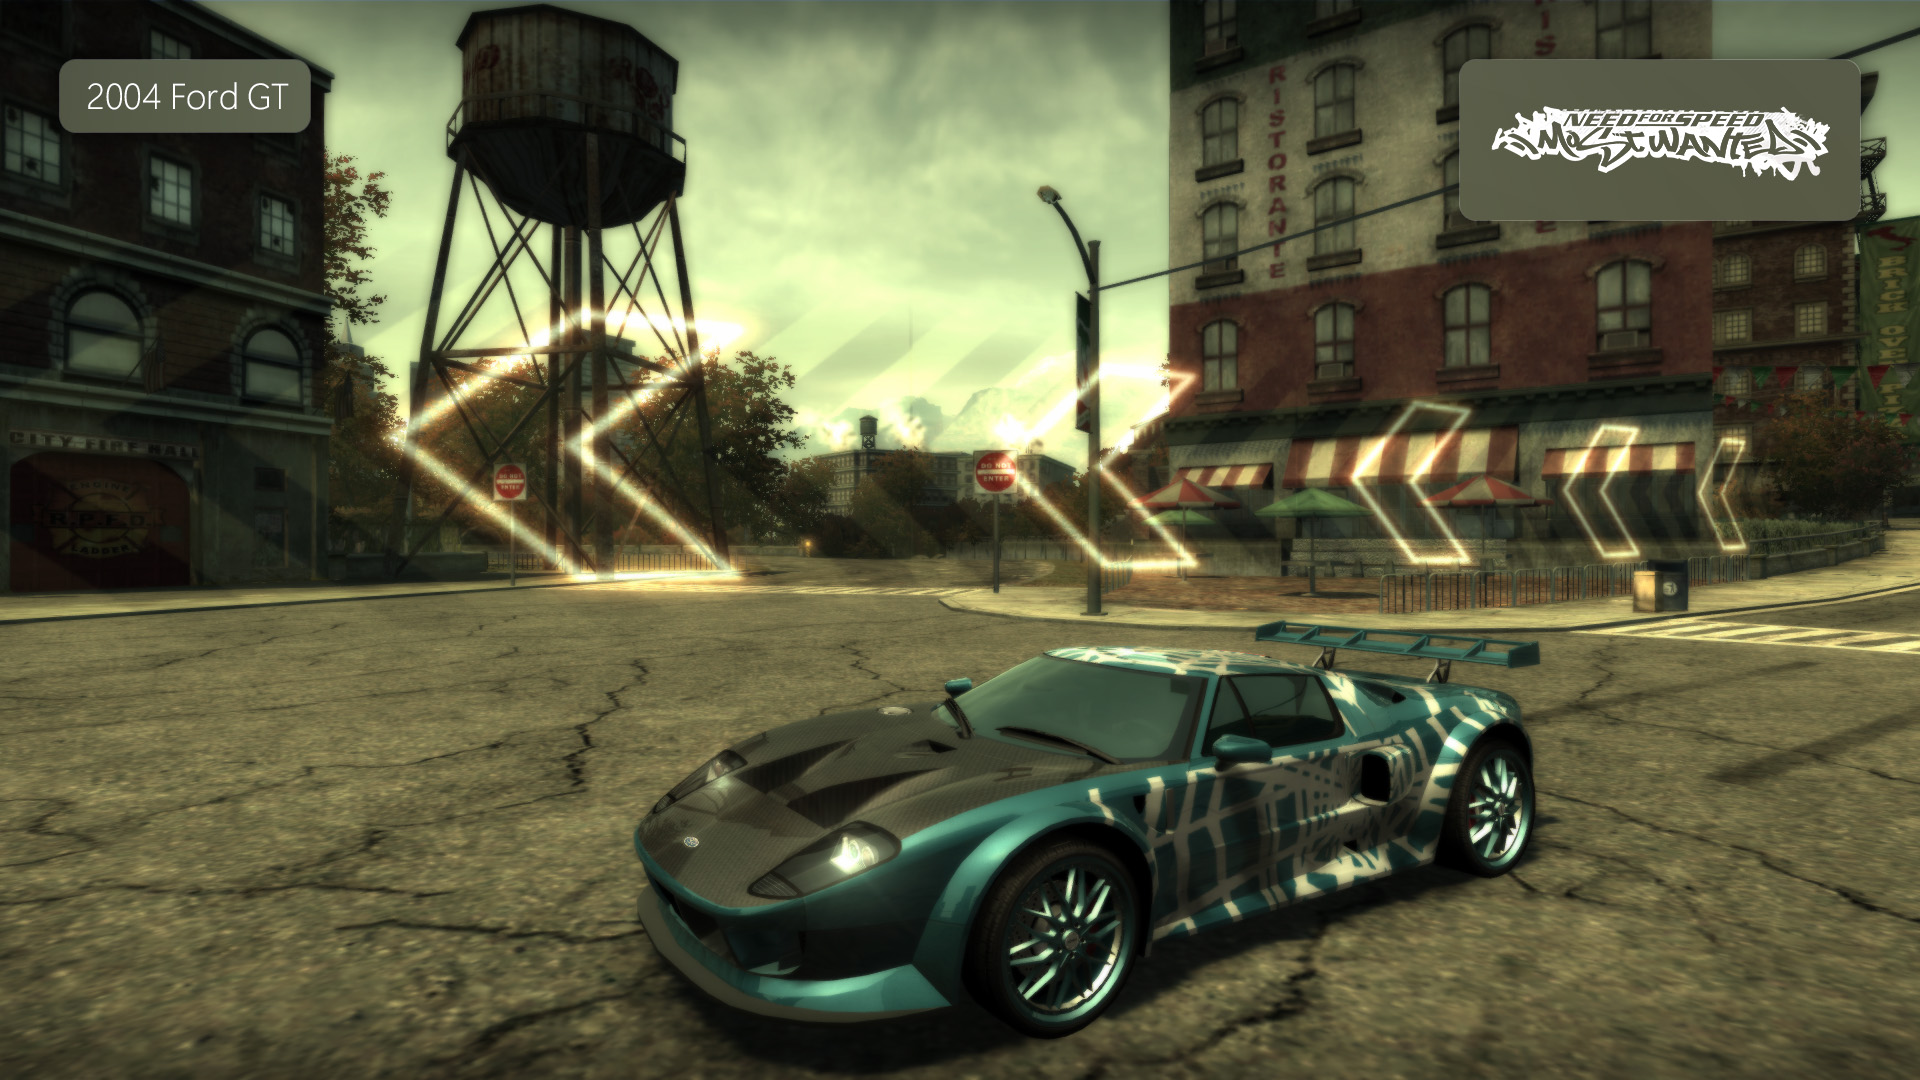 NFSMods - 2004 Ford GT [Replacement]